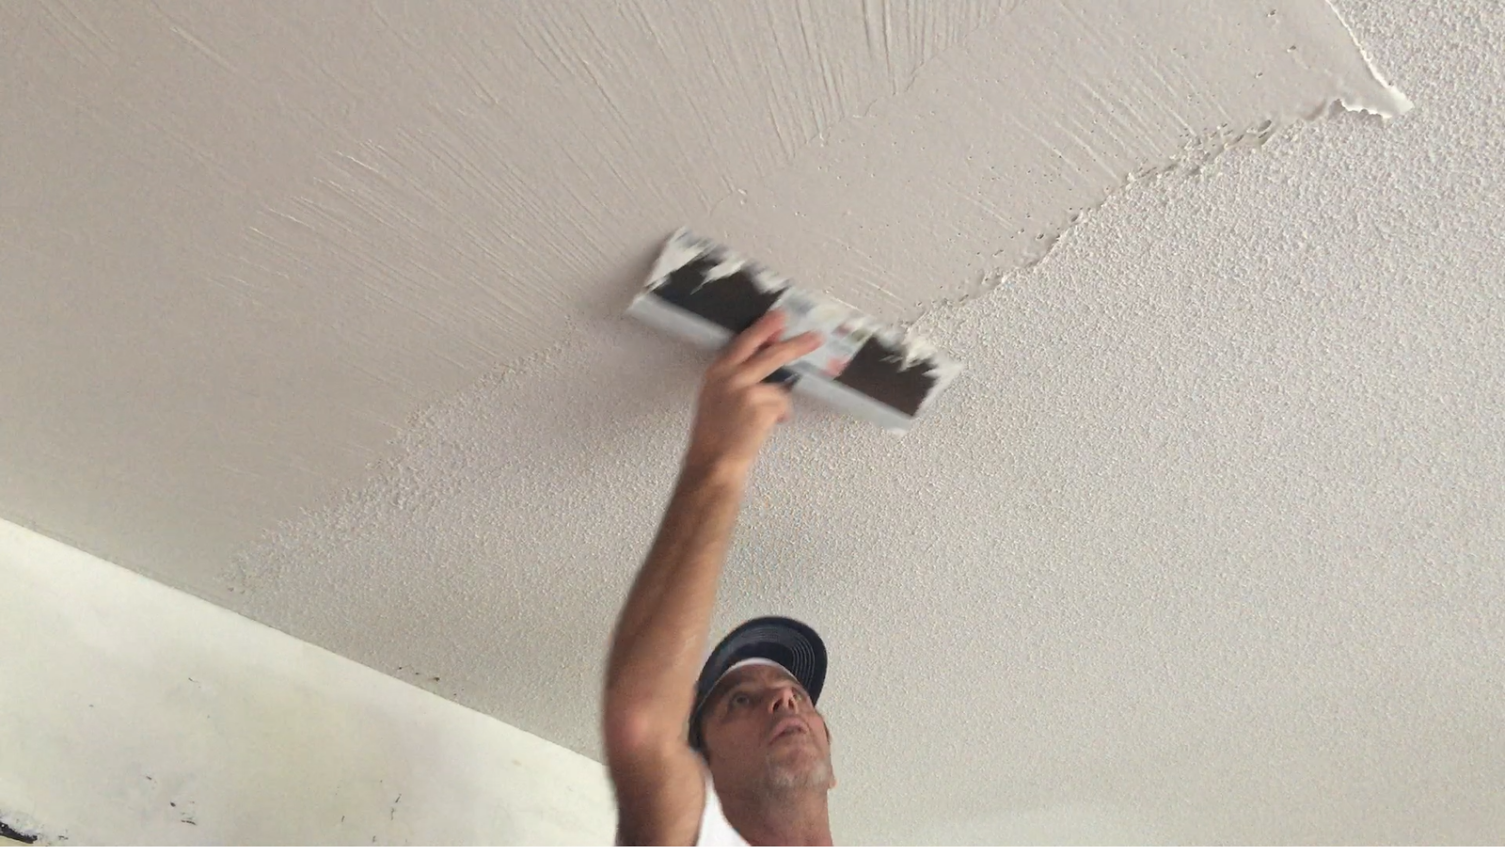 Popcorn Ceiling Removal Cost, How Much Does Popcorn Ceiling Removal Cost